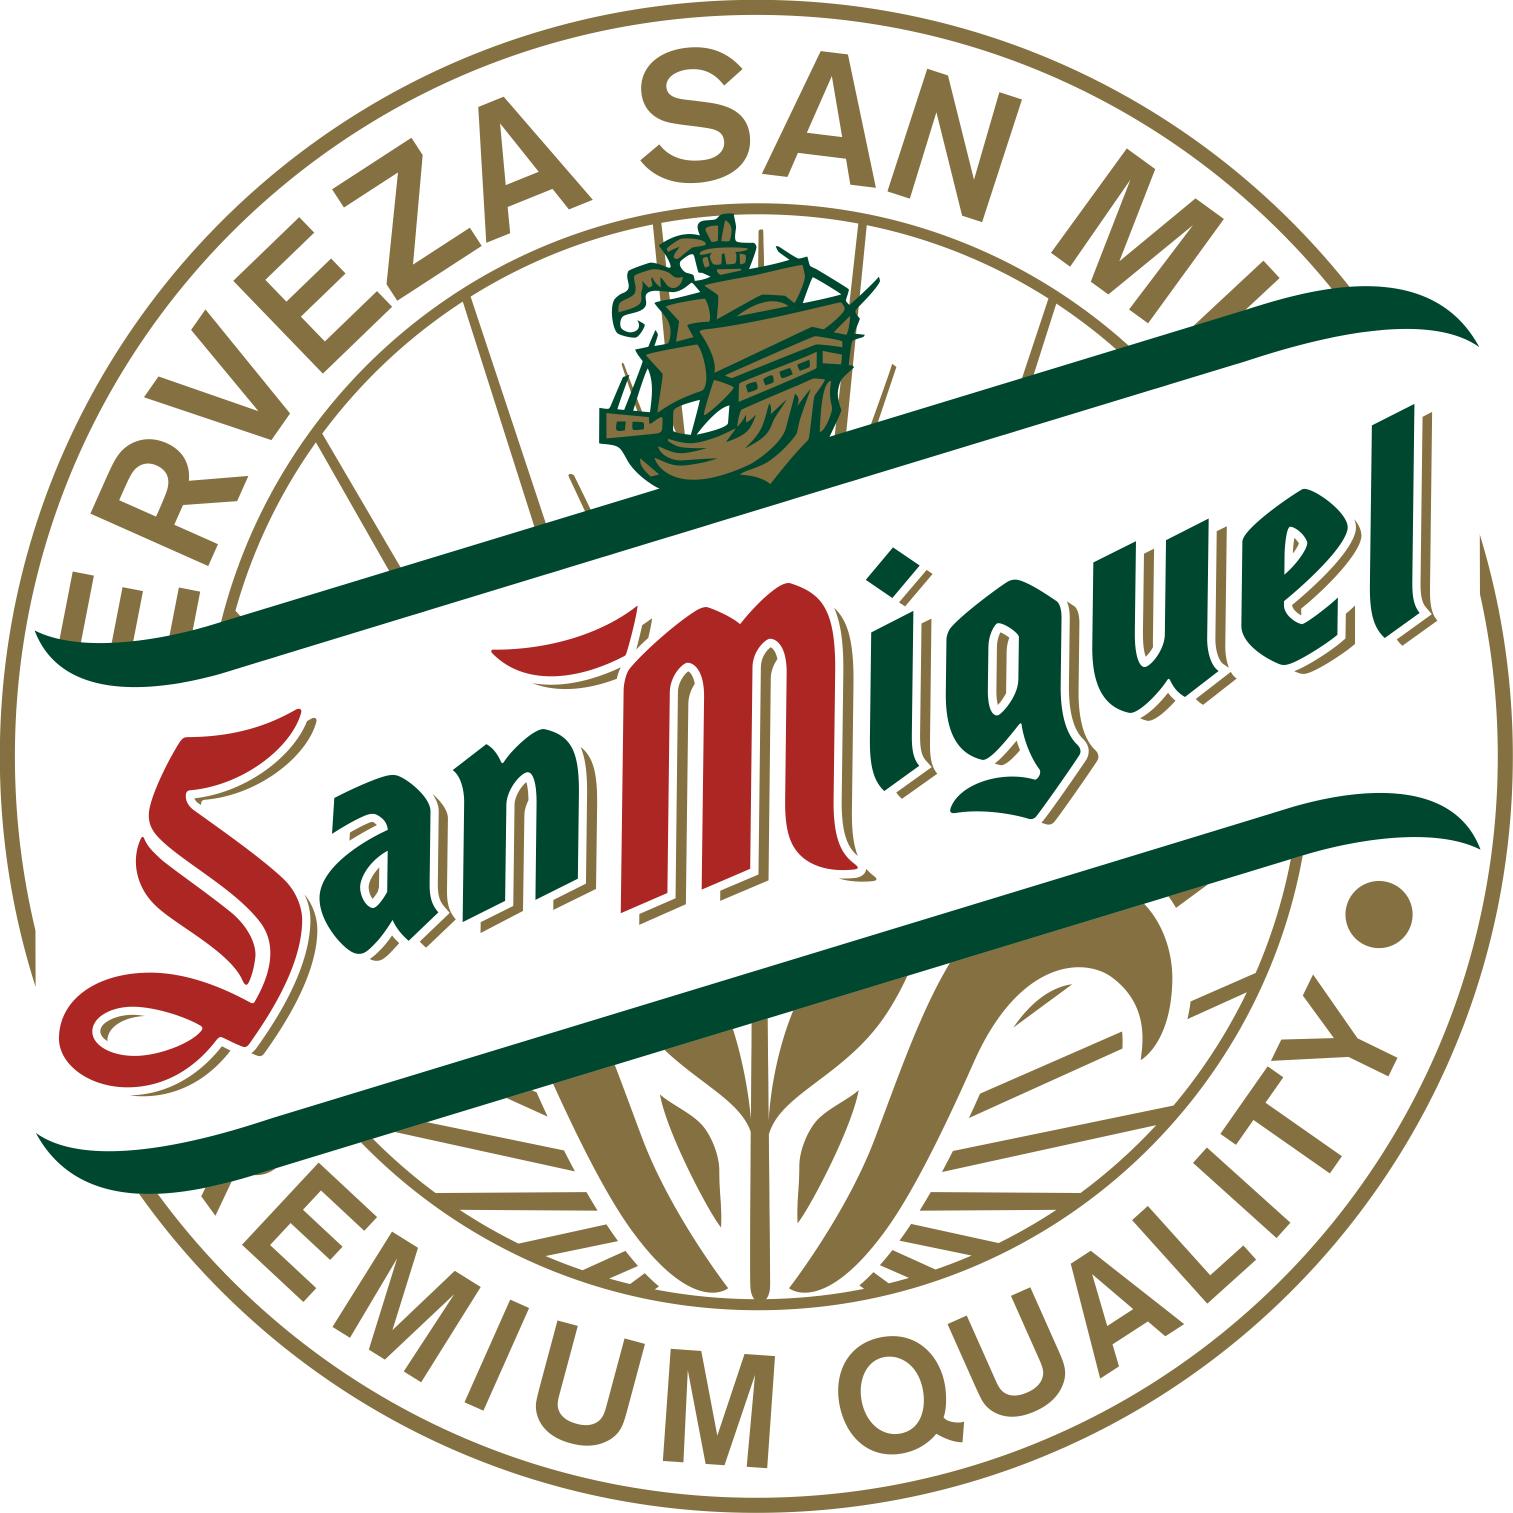 Philippines. San Miguel Brewery Incorporated increased volumes by 3% in 2015